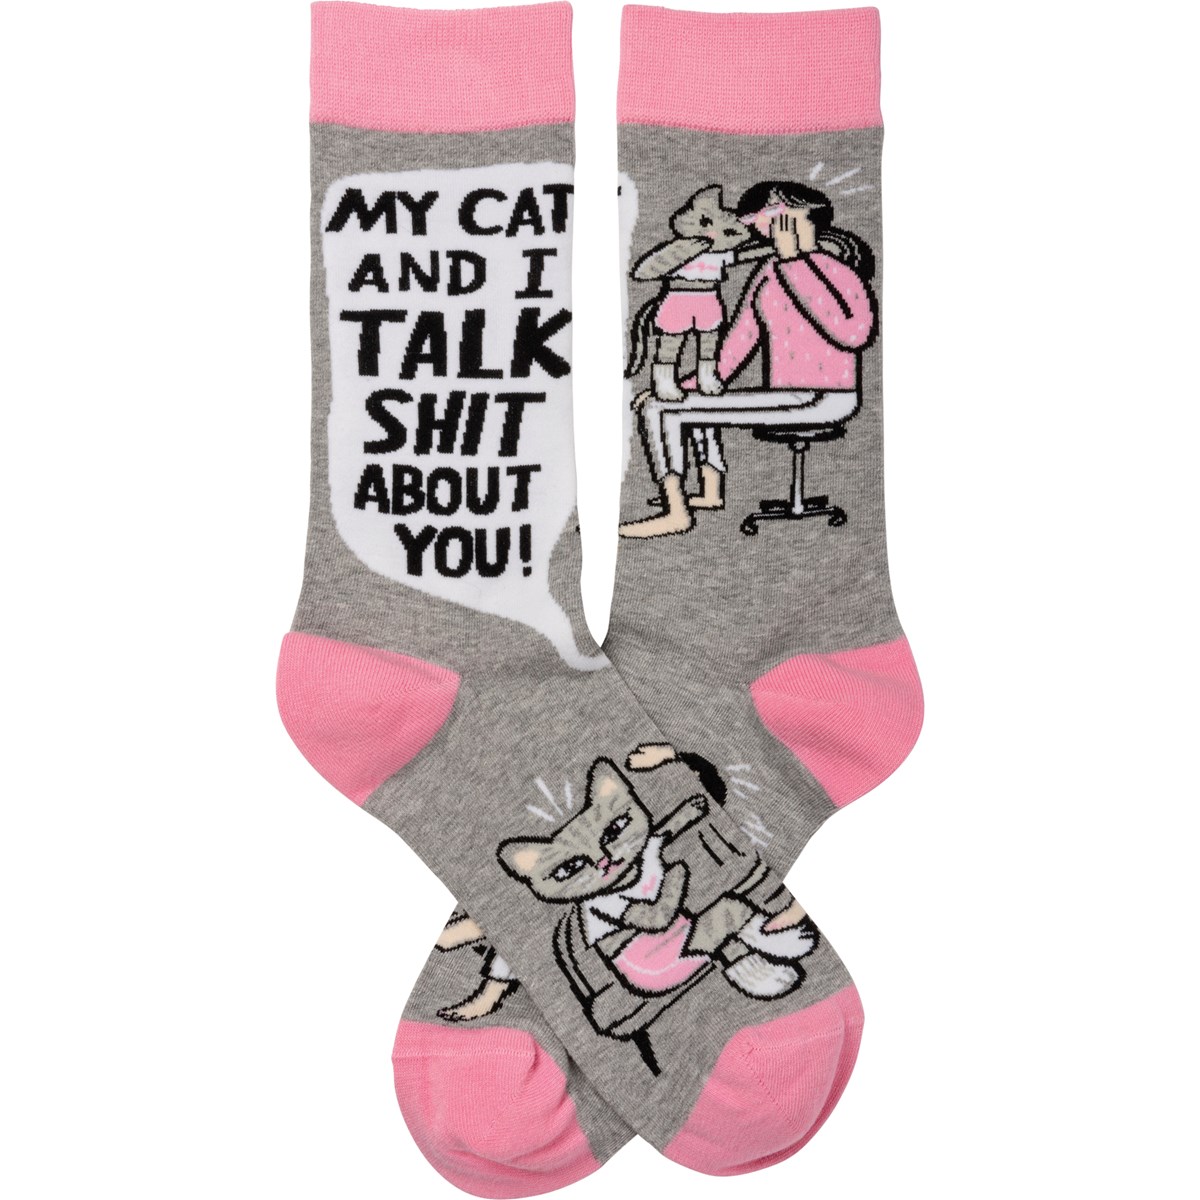 Socks - My Cat And I Talk About You - One Size Fits Most - Cotton, Nylon, Spandex